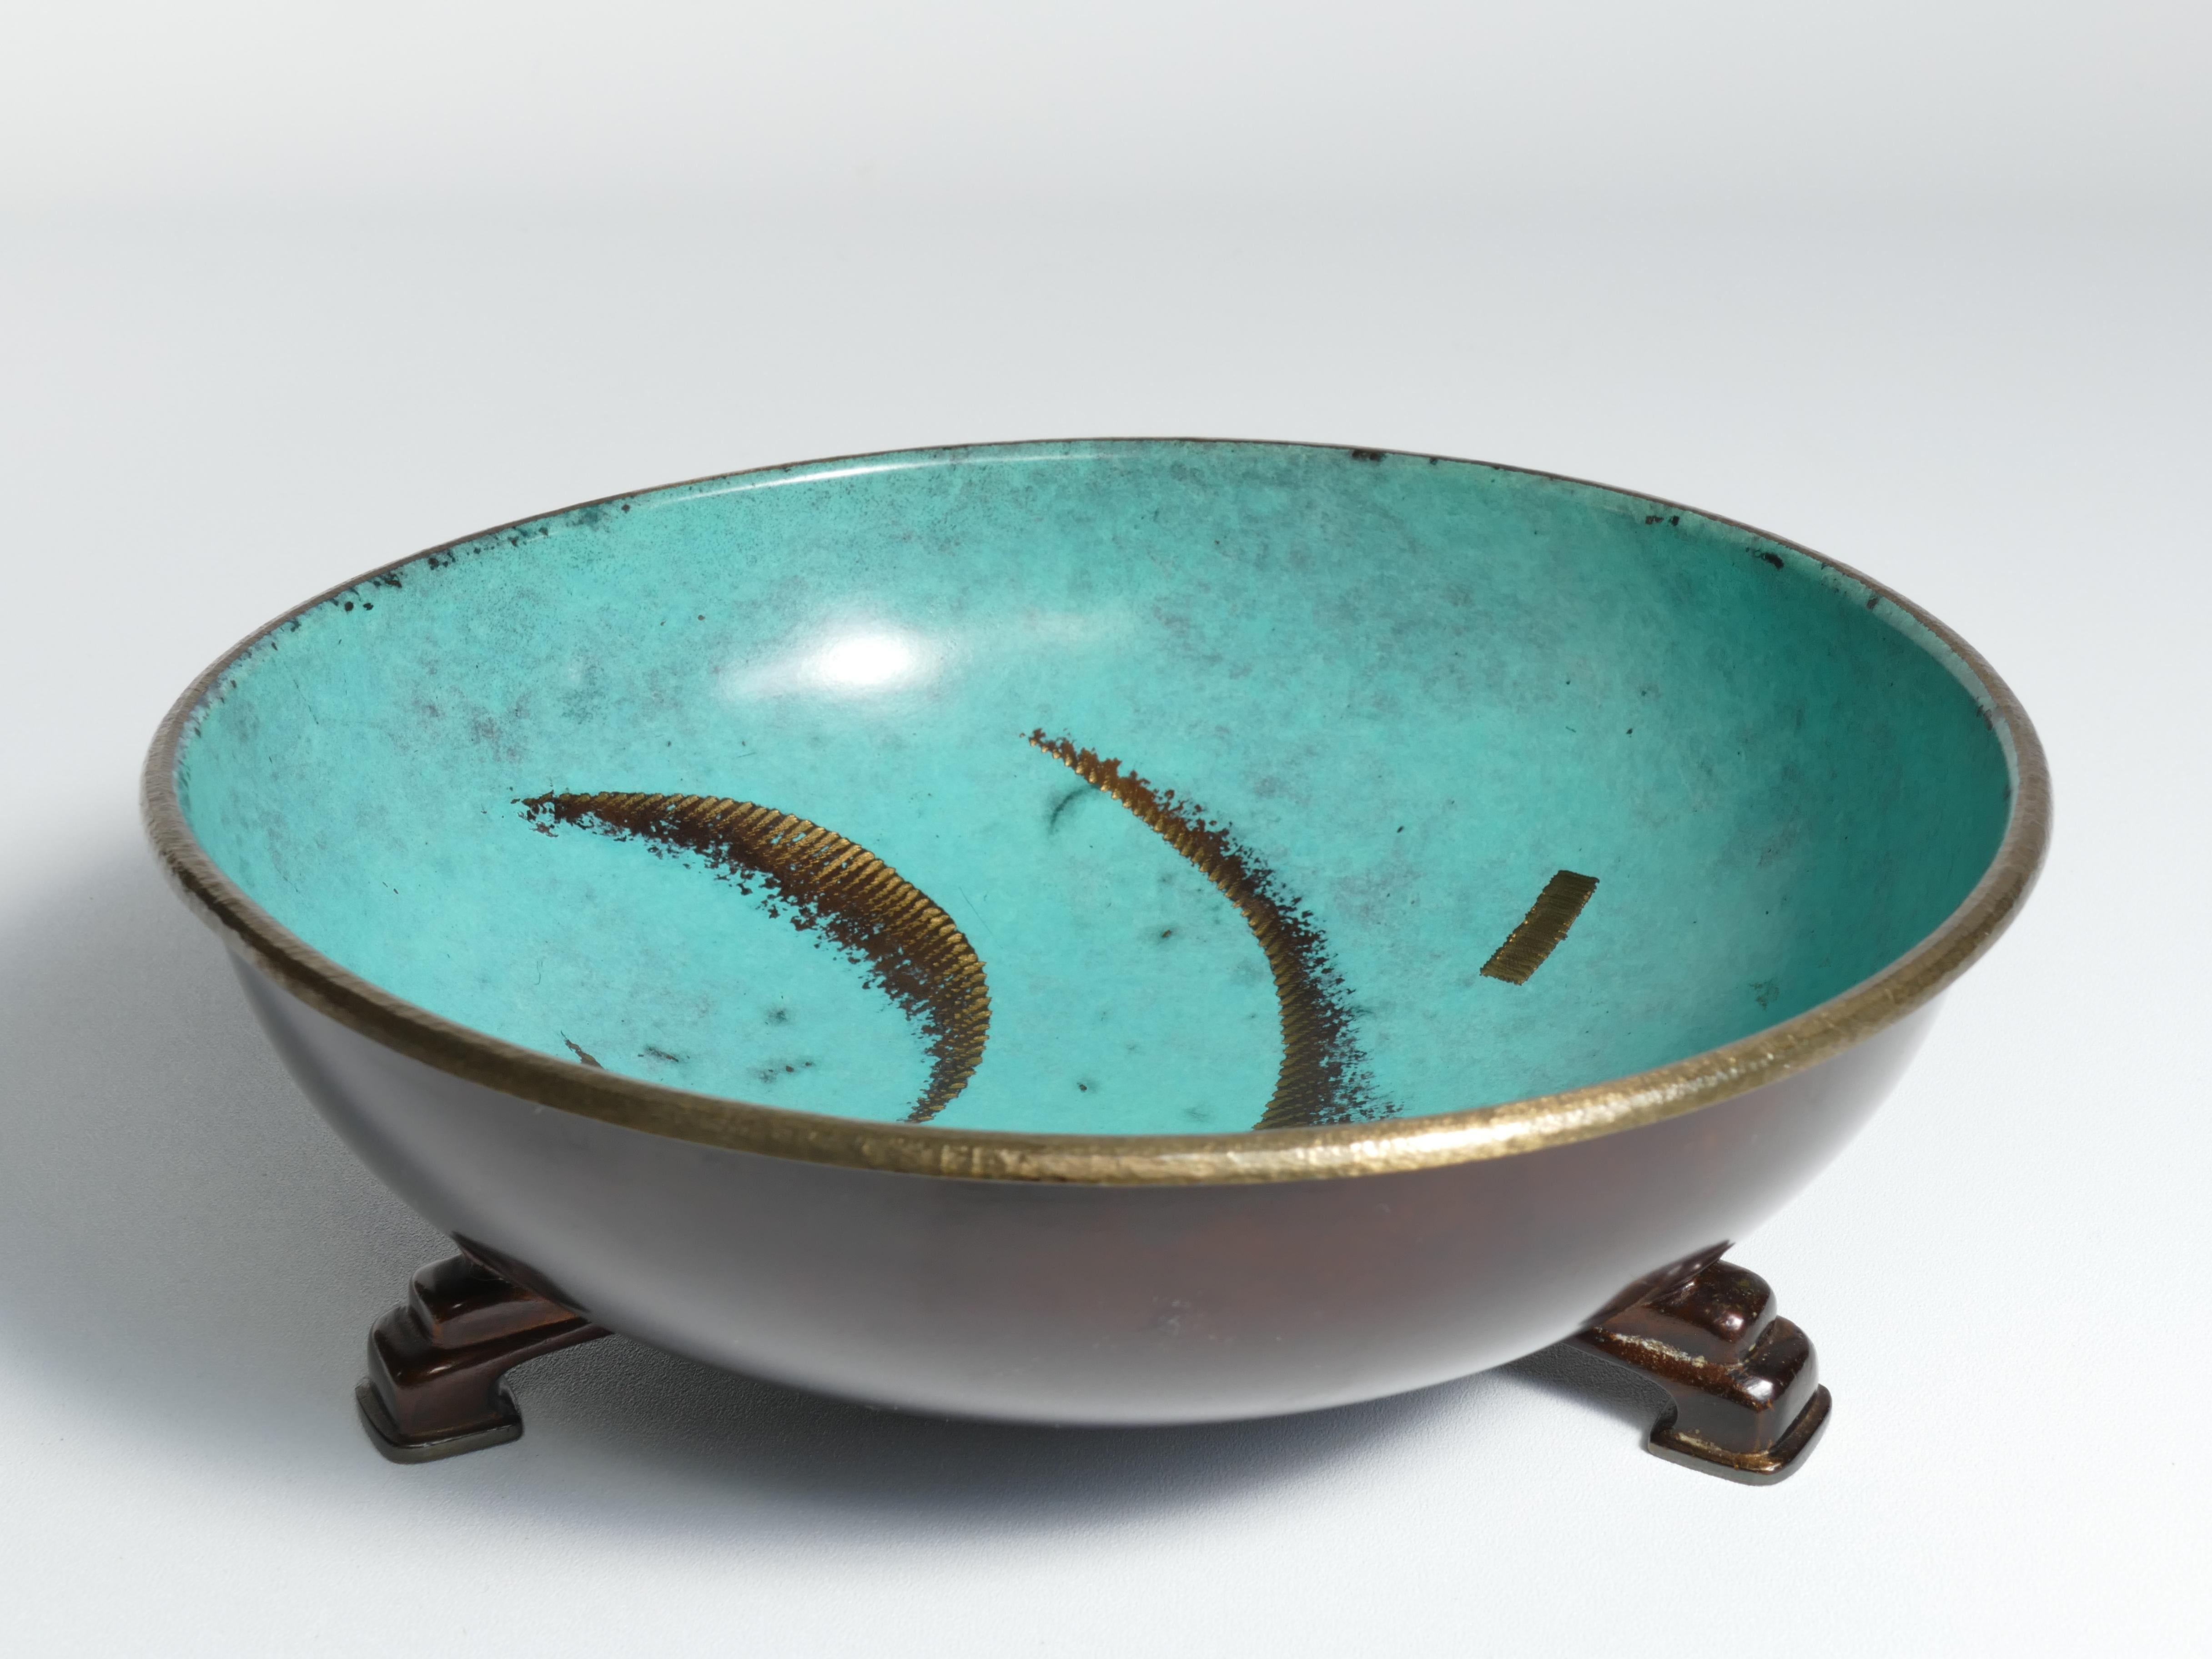 This is a significant and exceptionally sought-after WMF Ikora art deco dinanderie bowl, is manufactured by Württembergische Metallwarenfabrik (WMF) in Germany during the 1920s to 1930s. This striking design features a hand-crafted abstract decor in